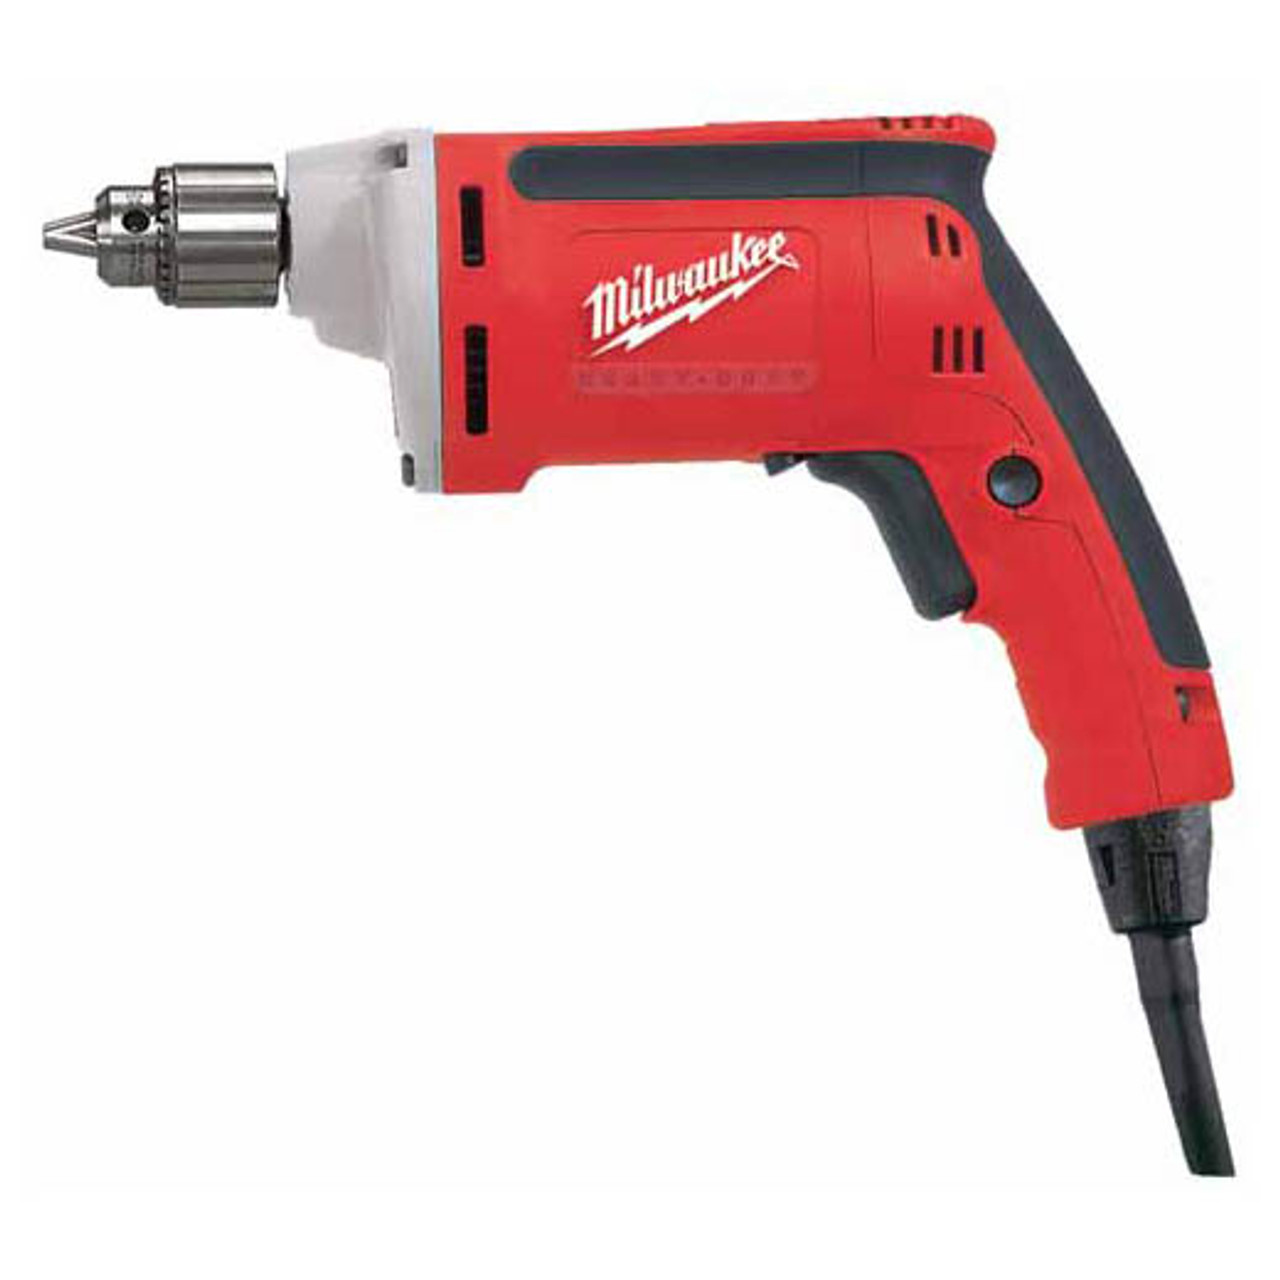 1/4" Magnum Drill, 0-4000 RPM with QUIK-LOK Cord